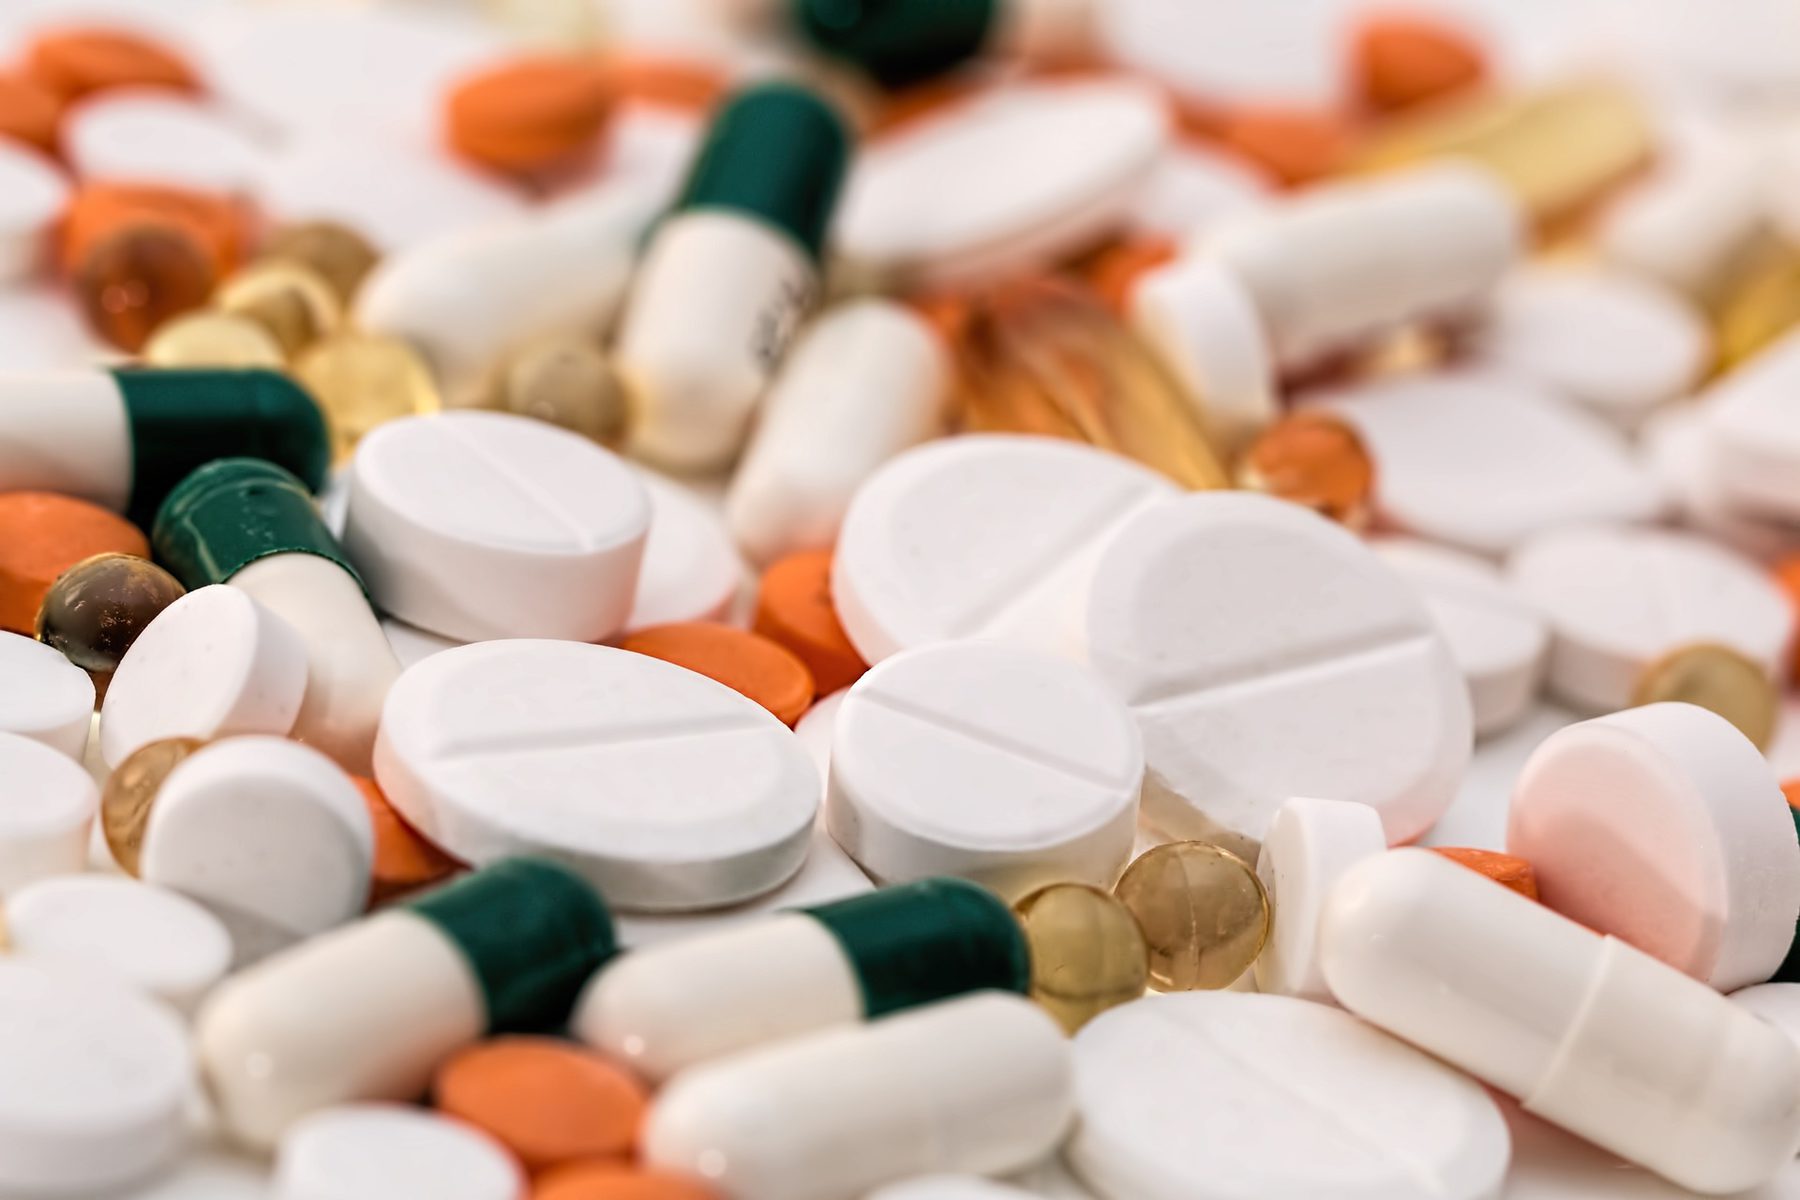 Pharmaceuticals (Sector Header: Pills and Capsules)